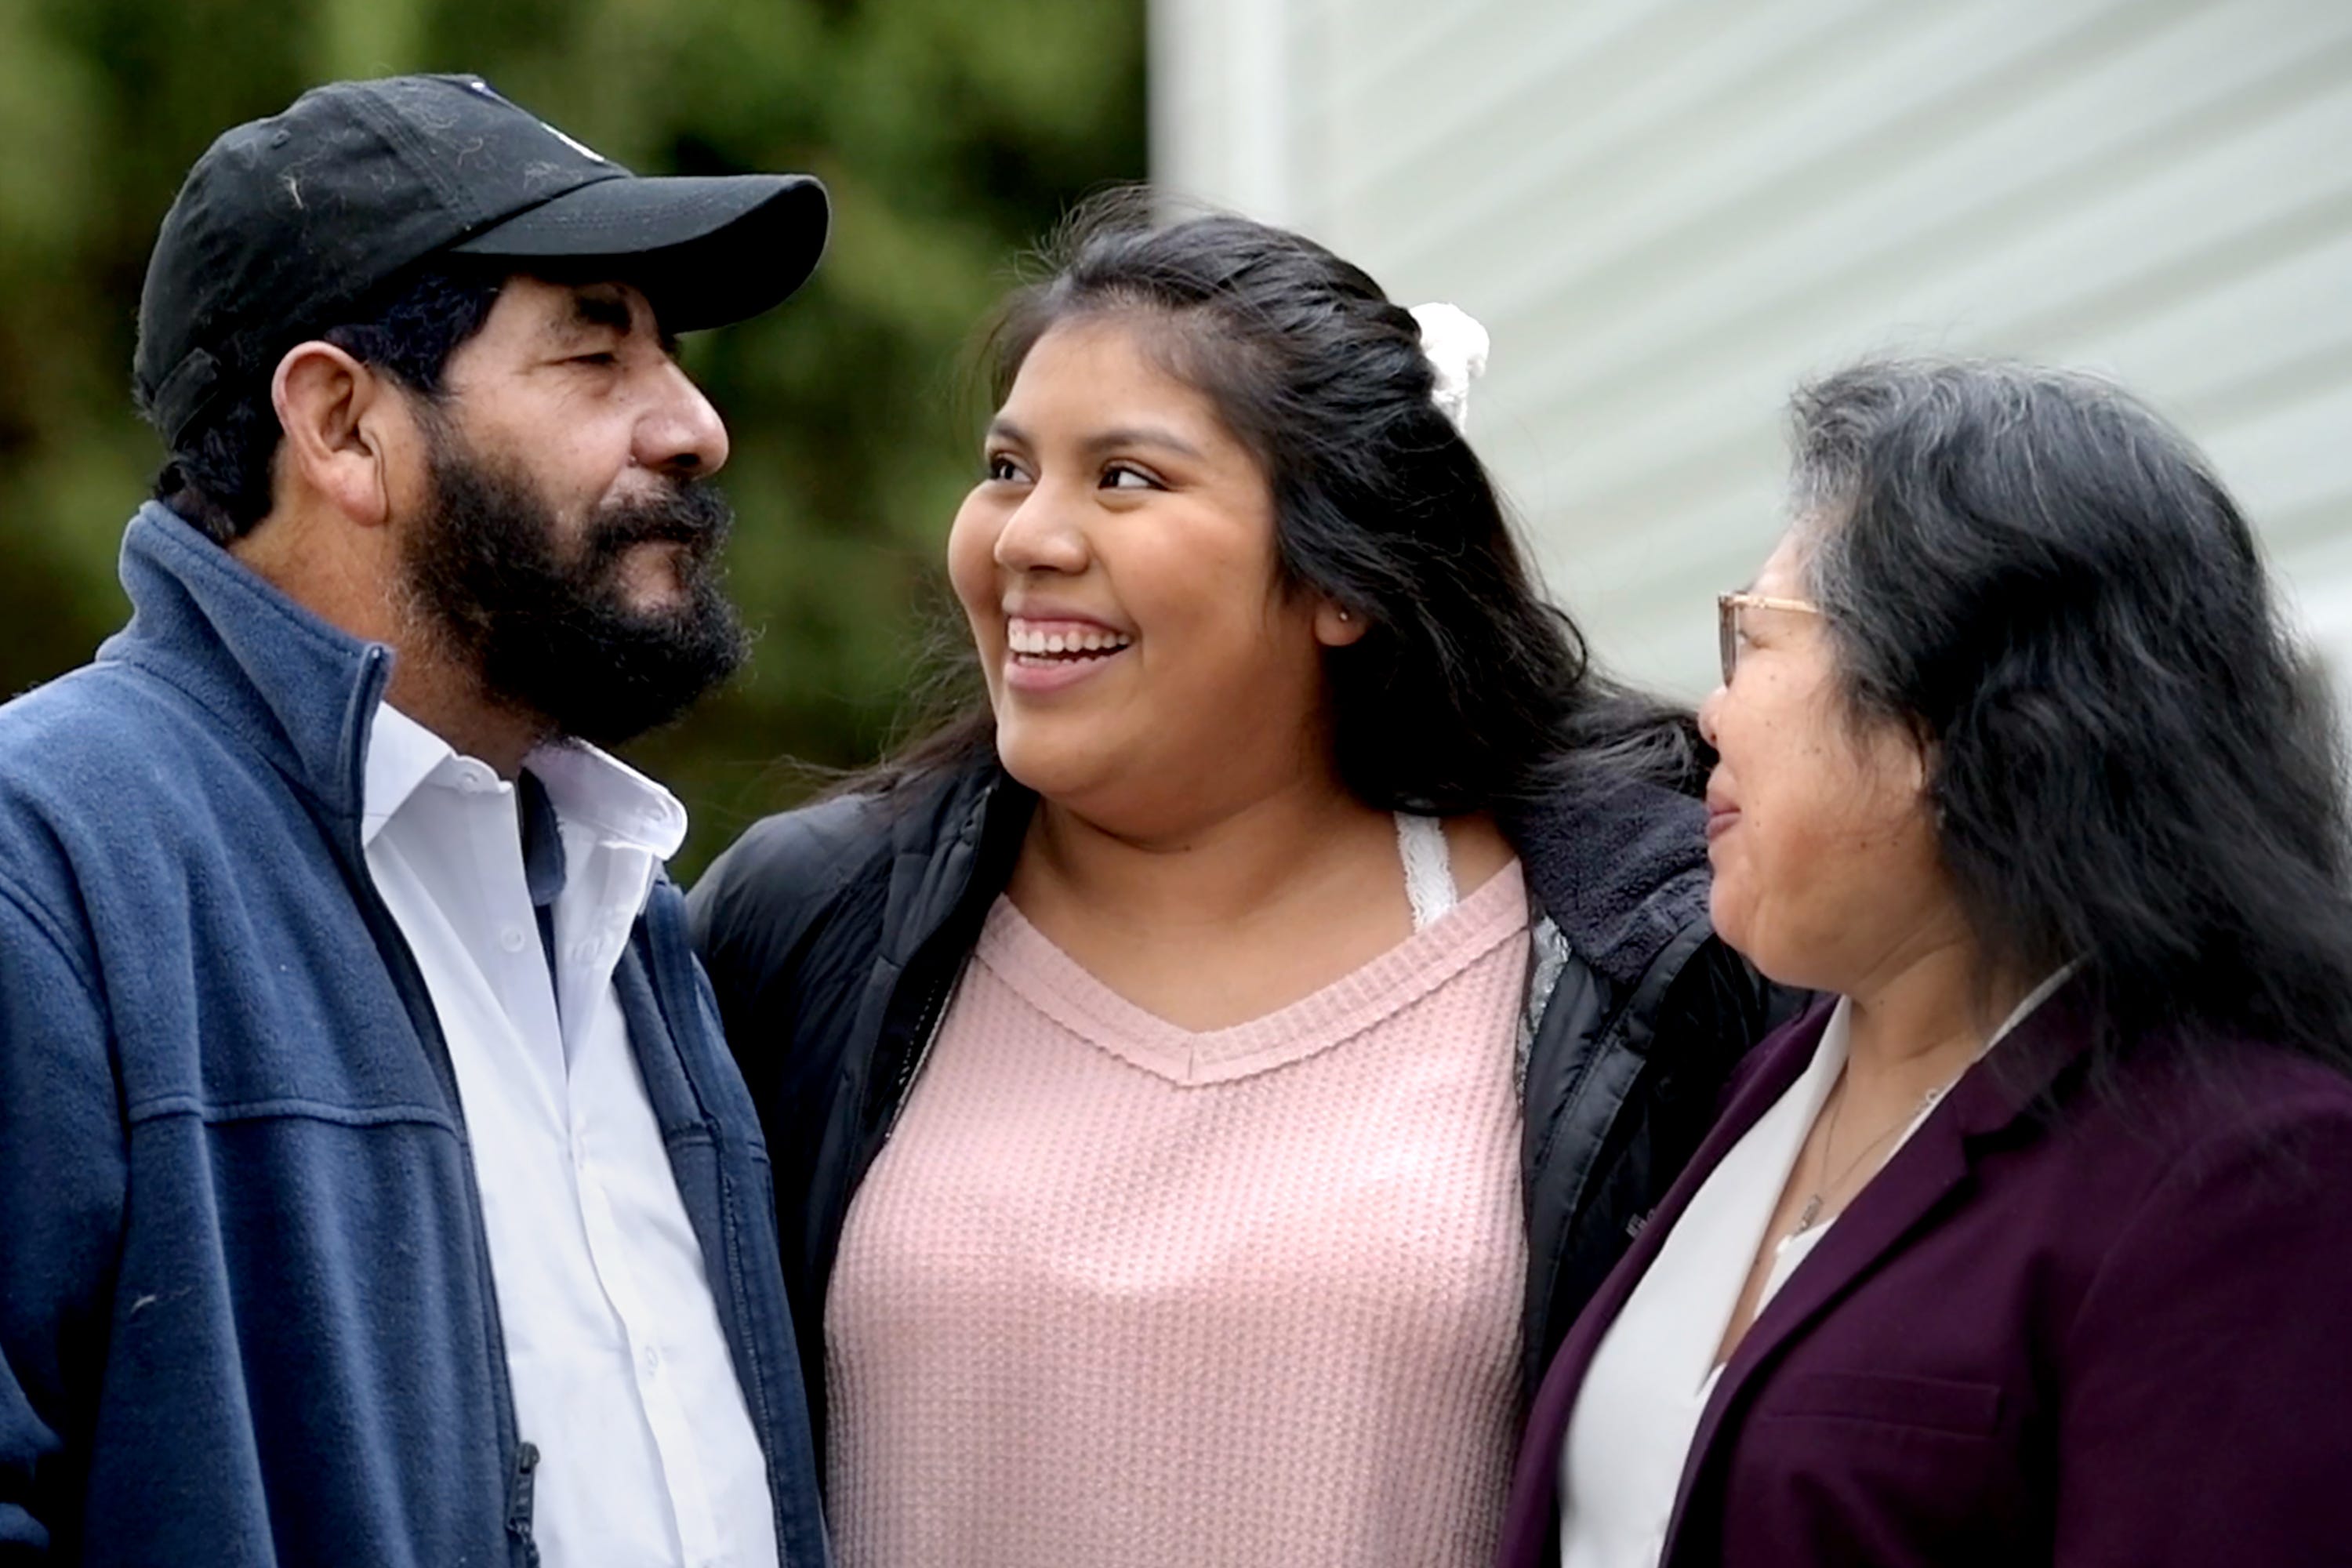 Guillermina Gutierrez Martinez, center, has often said she is pursuing a college degree for her parents, Felipe Gutierrez and Carmen Martinez Medina. But over the last year, she's realized "I want it for me, too."